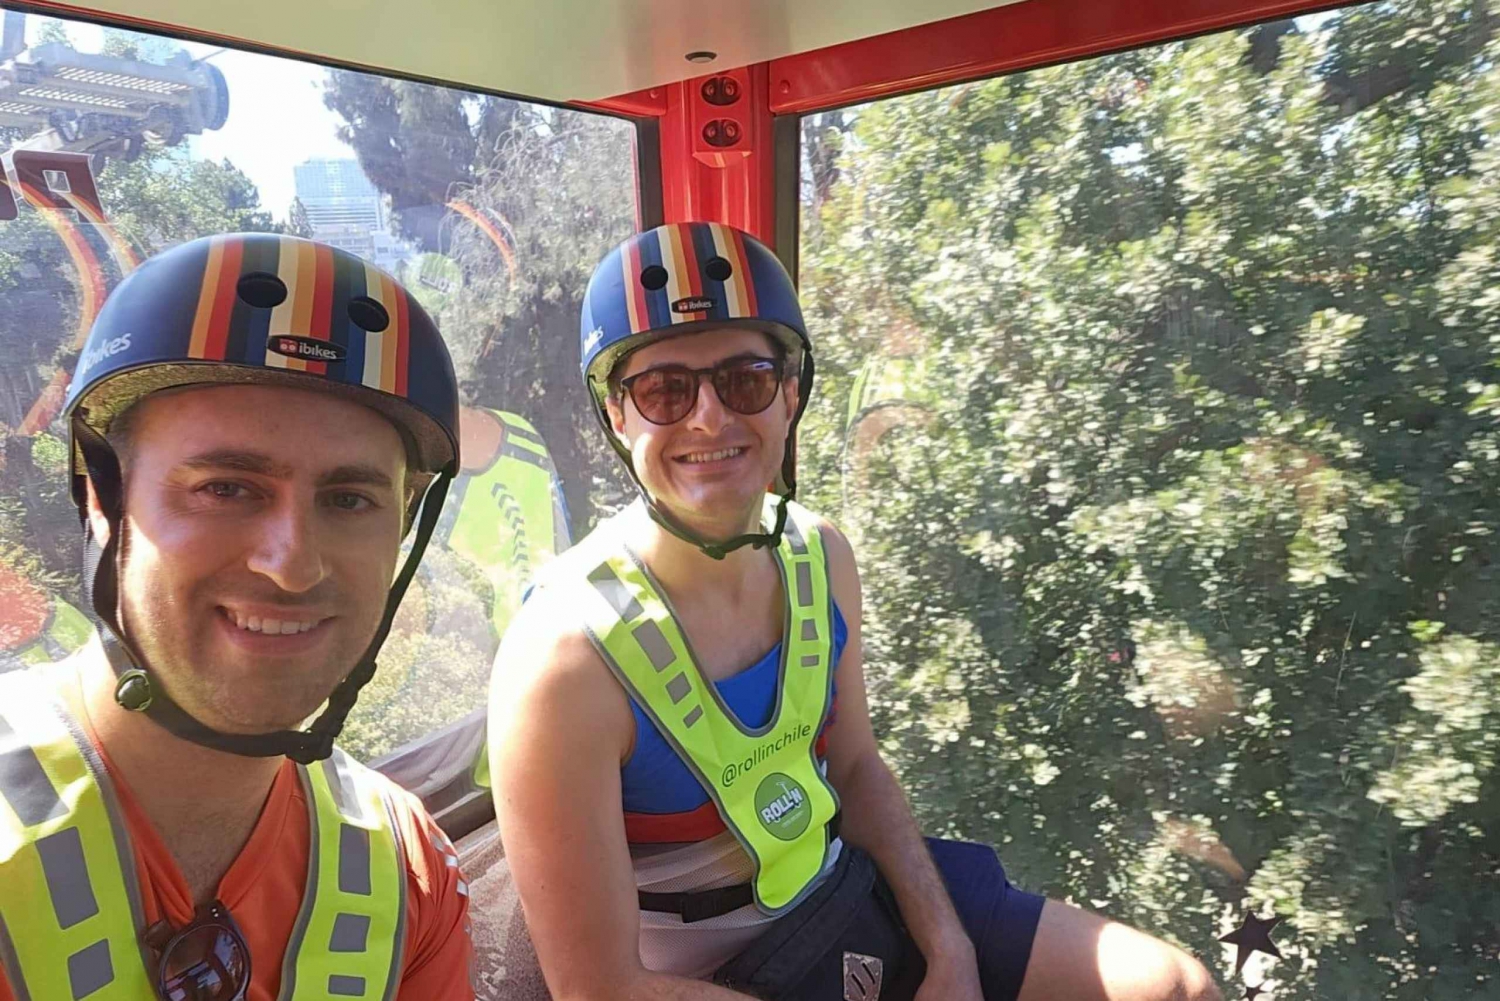 Santiago: E-Scooter Tour with Cable Car Ride (half a day)